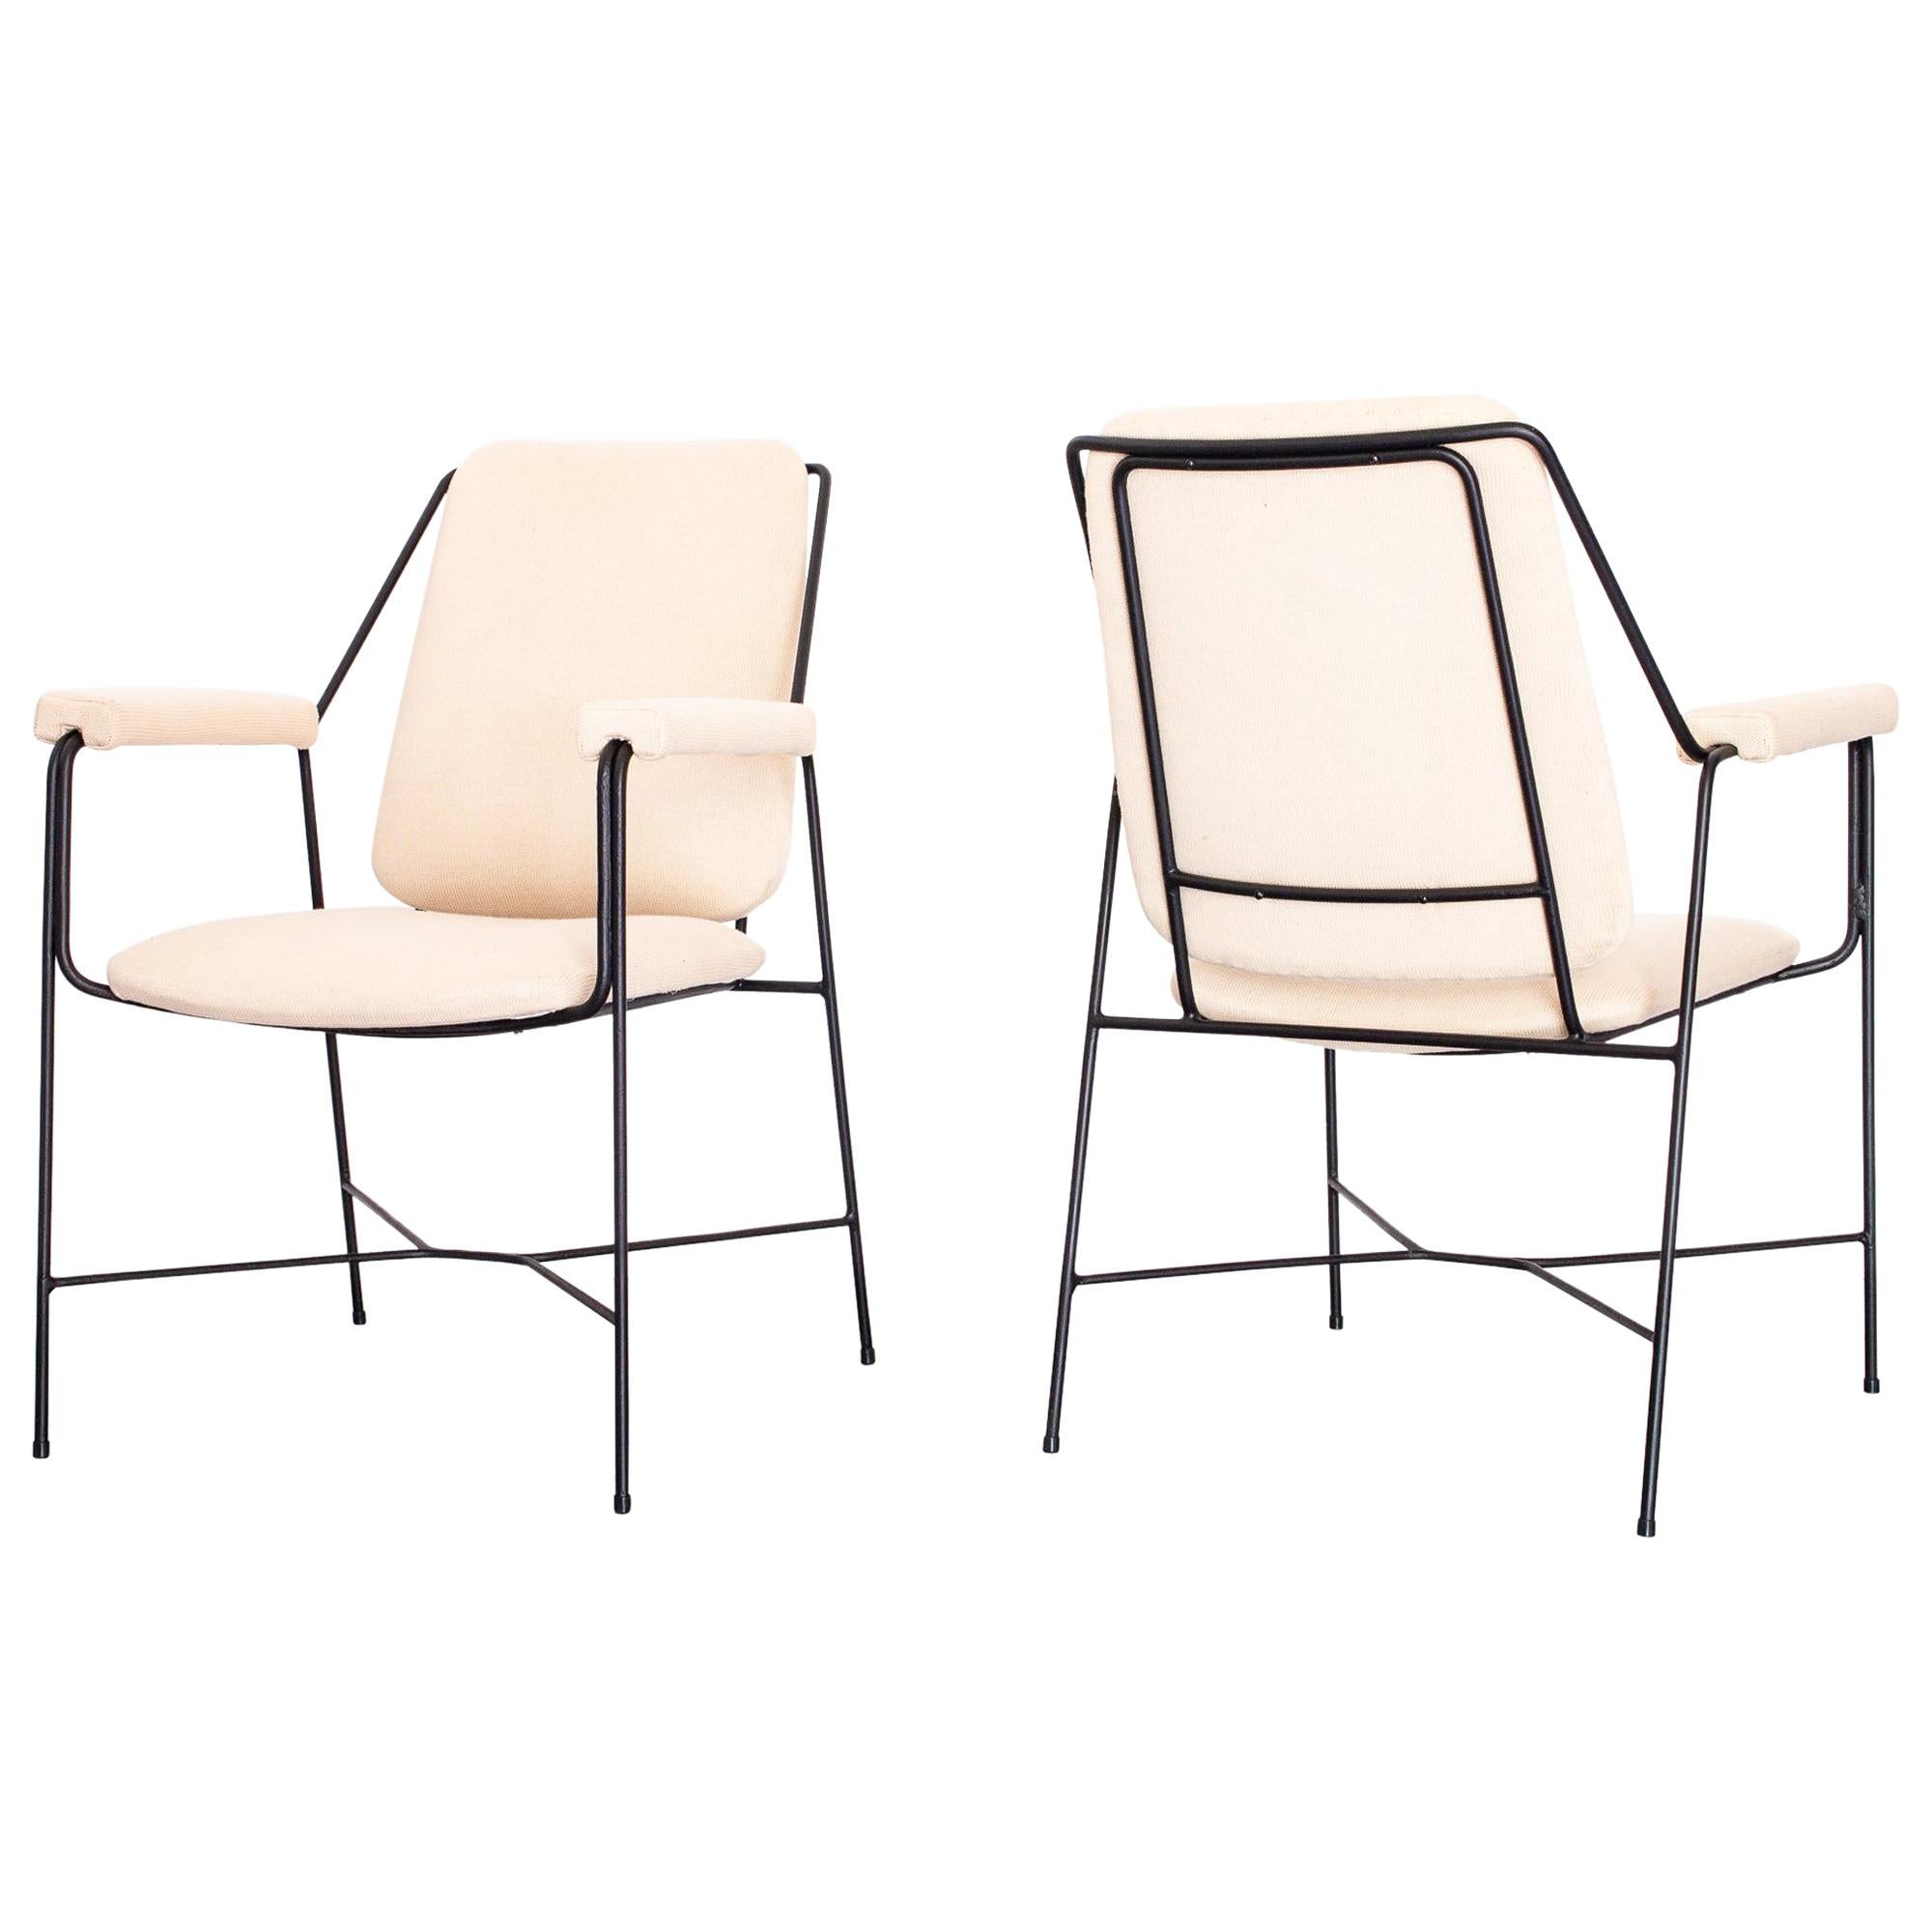 1960s Pair of Lounge Chairs in Wrought Iron and Tricot, Brazilian Modernism